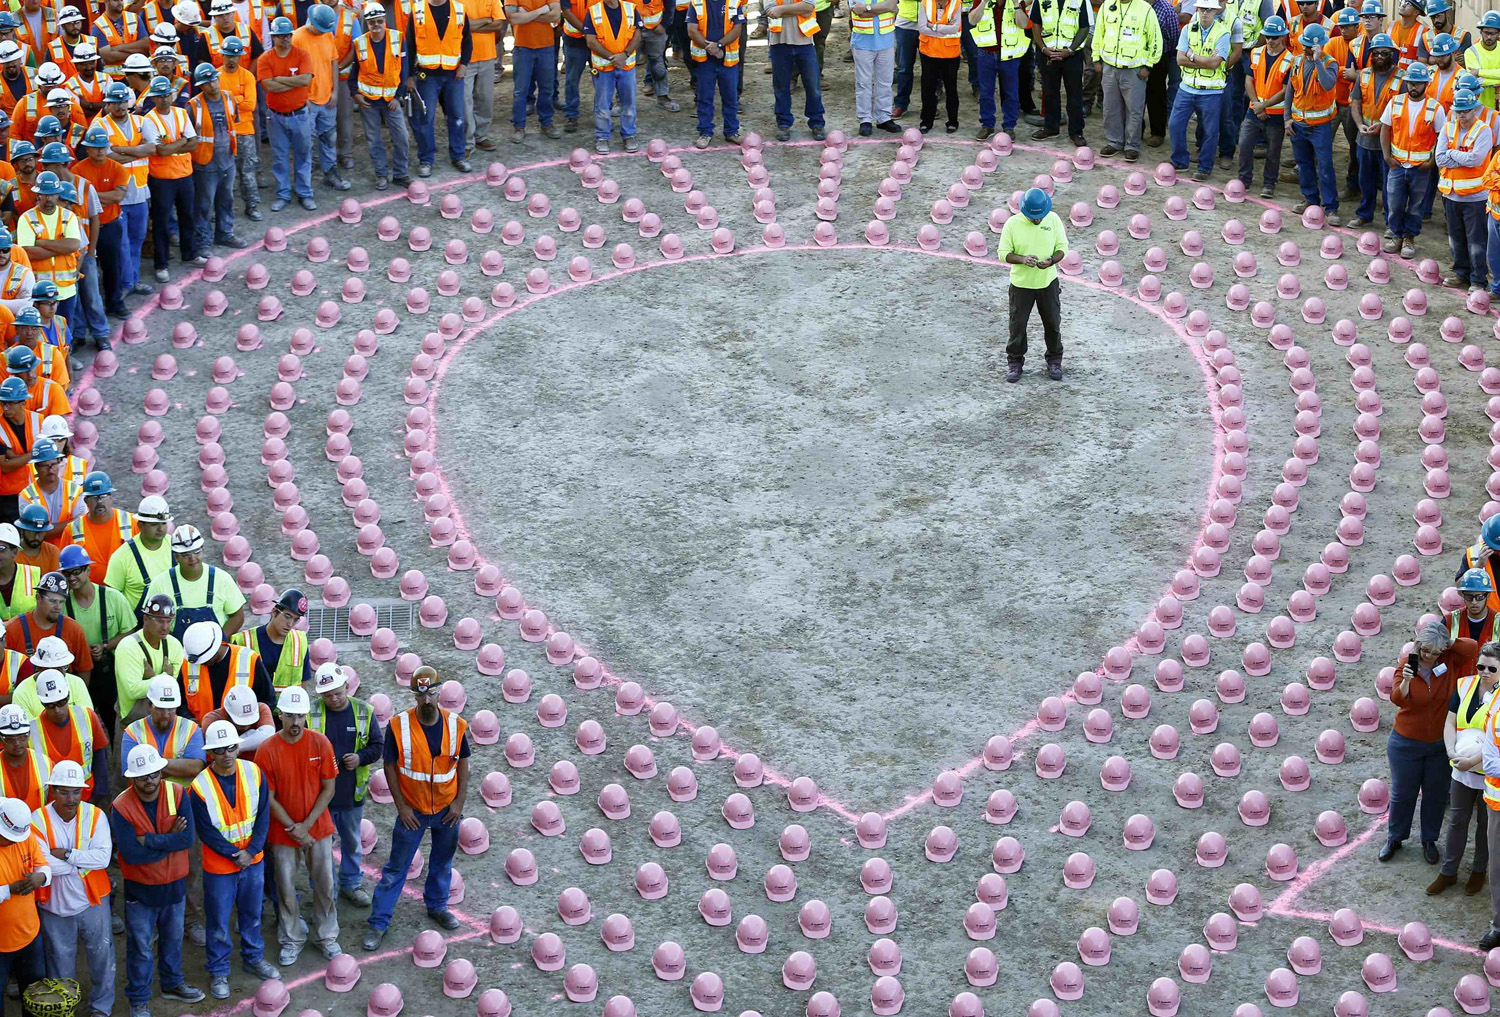 Construction workers from EMCOR Dynalectric wait to put on pink hard hats and be part of a giant pink ribbon formation to promote the start of Breast Cancer Awareness Month, at the UC San Diego Jacobs Medical Center construction site in La Jolla, Calif. on Sept. 30, 2014.